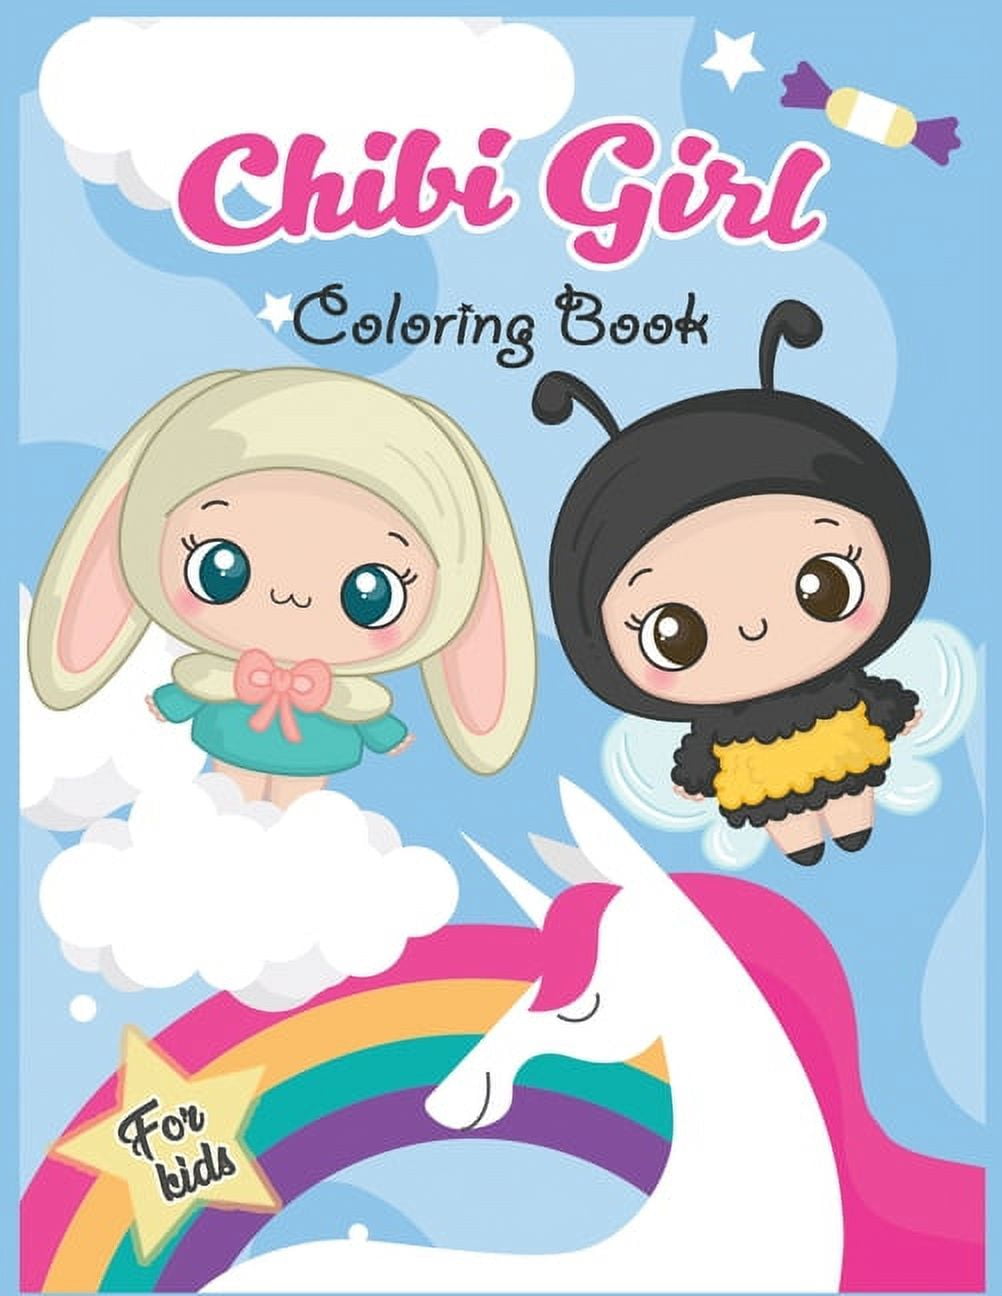 Chibi Movie Characters Coloring Book For Kids Ages 8-12: FUNNY